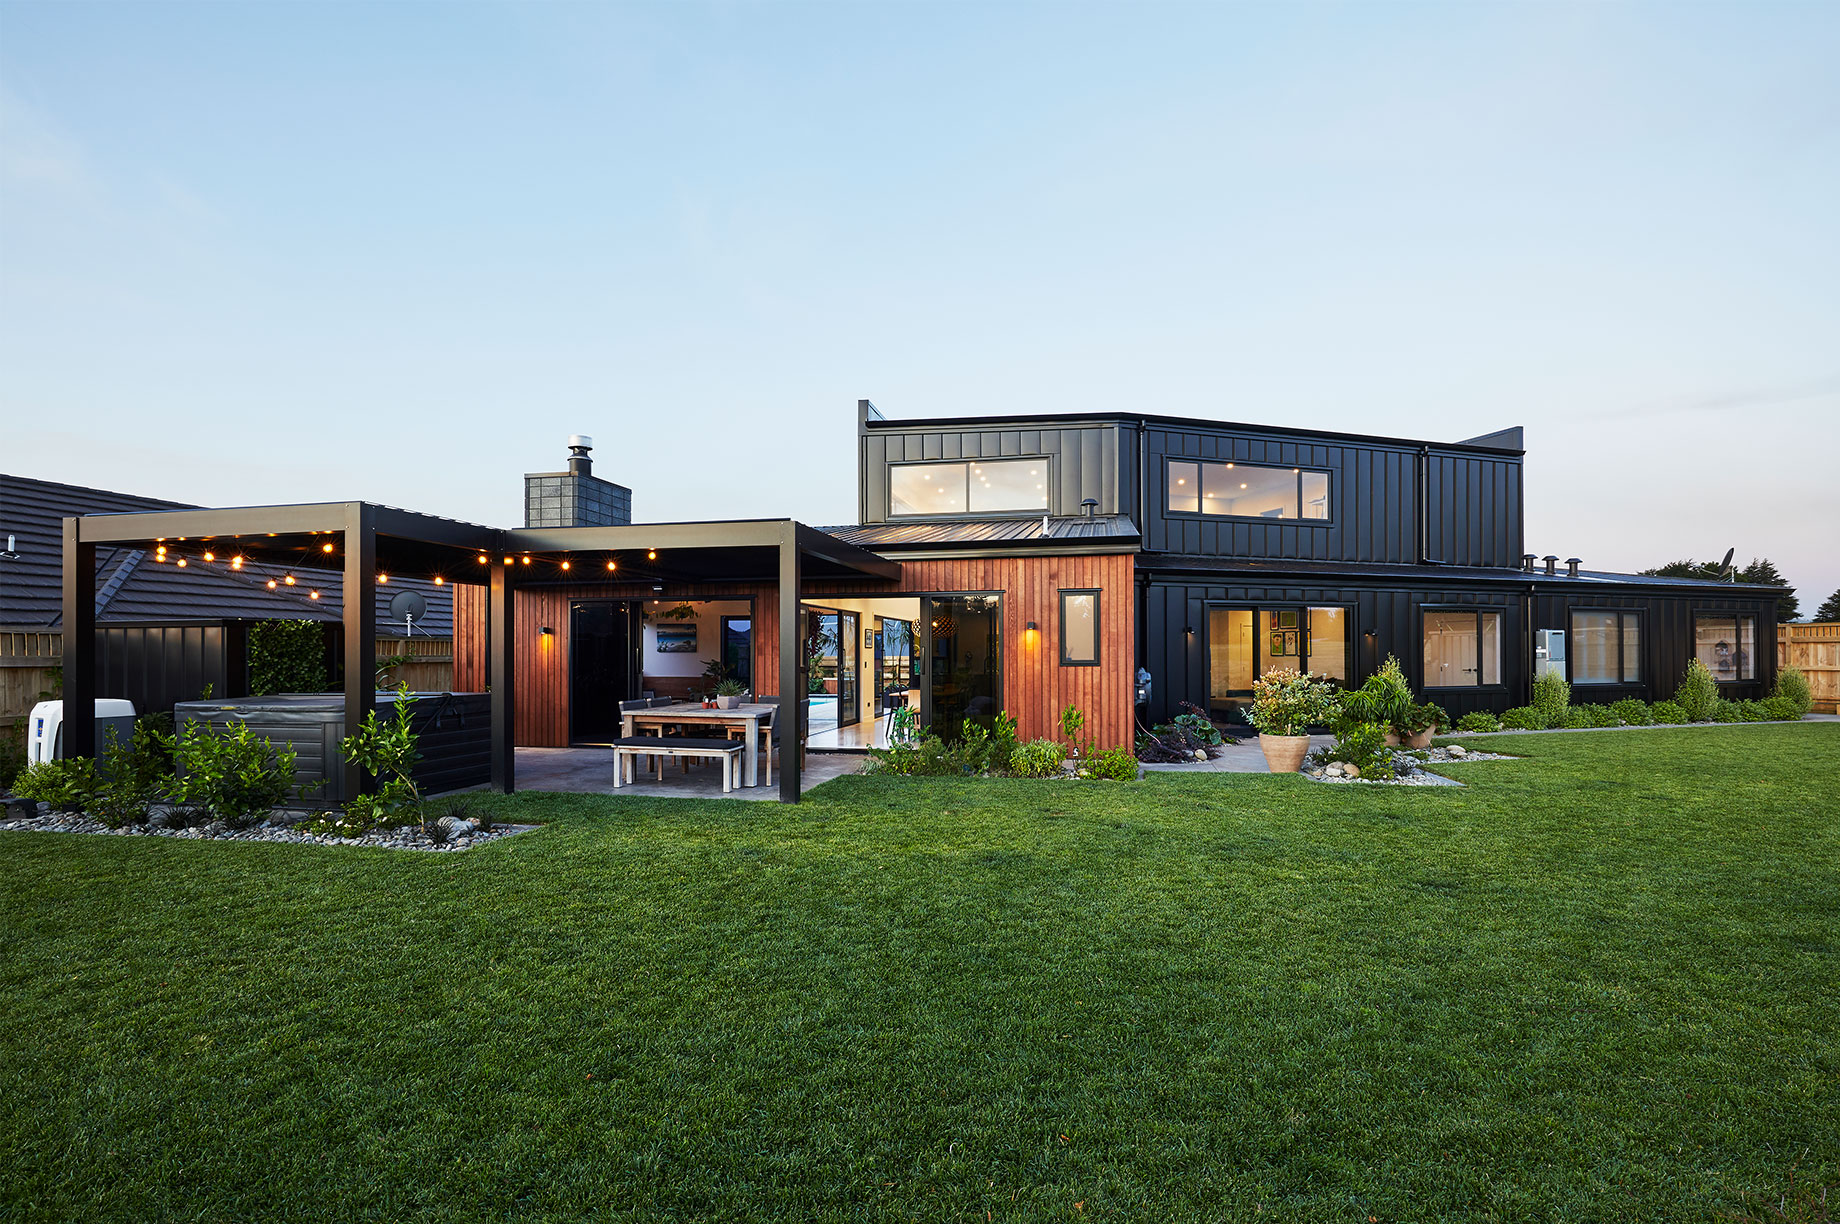 Rural black and wooden home exterior